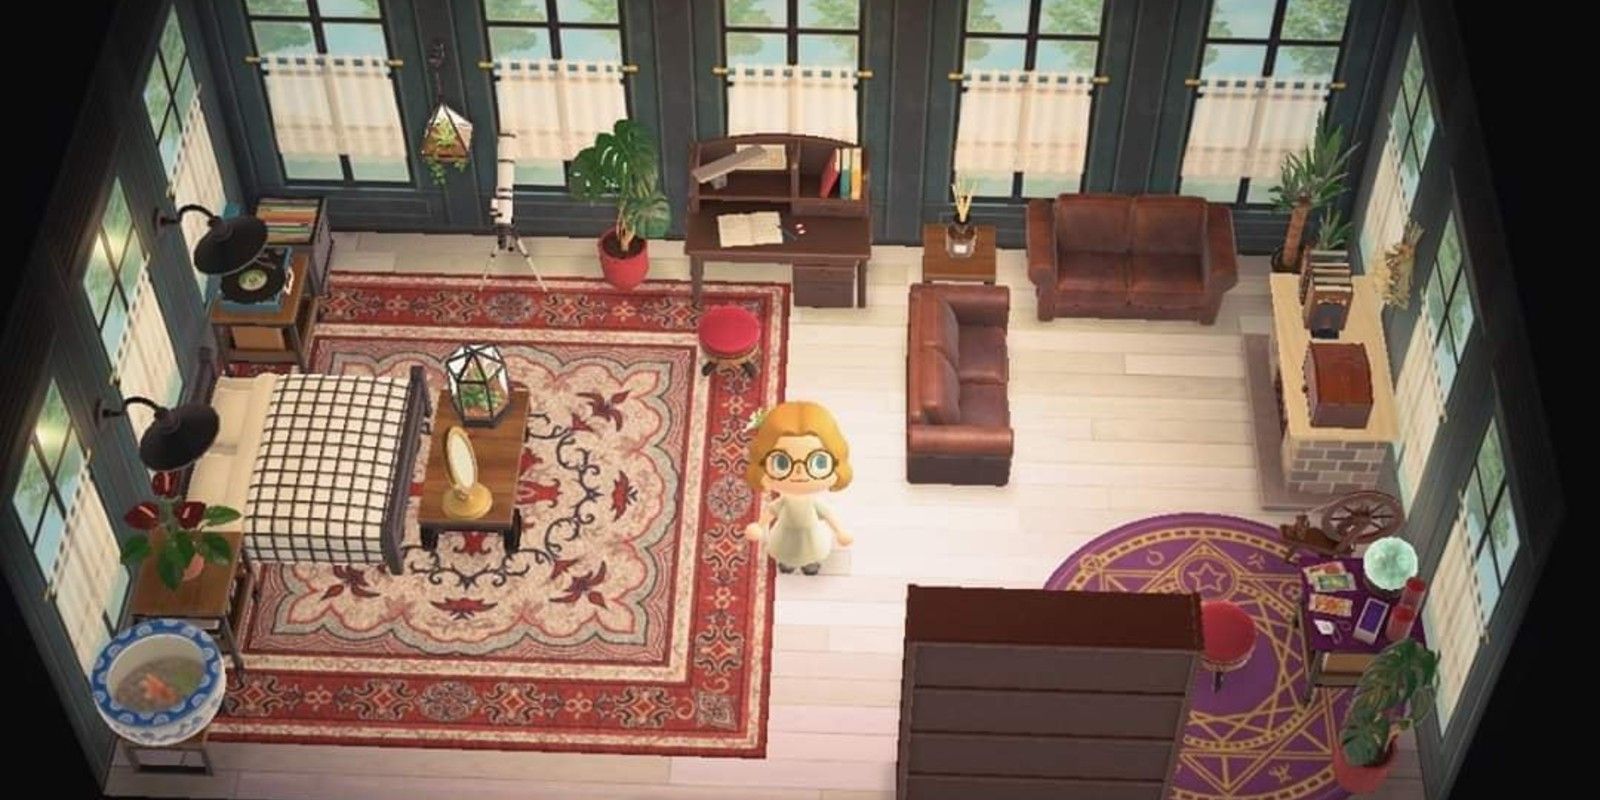 In Animal Crossing: New Horizons, a player uses a rug from his home to mark the zones of a room